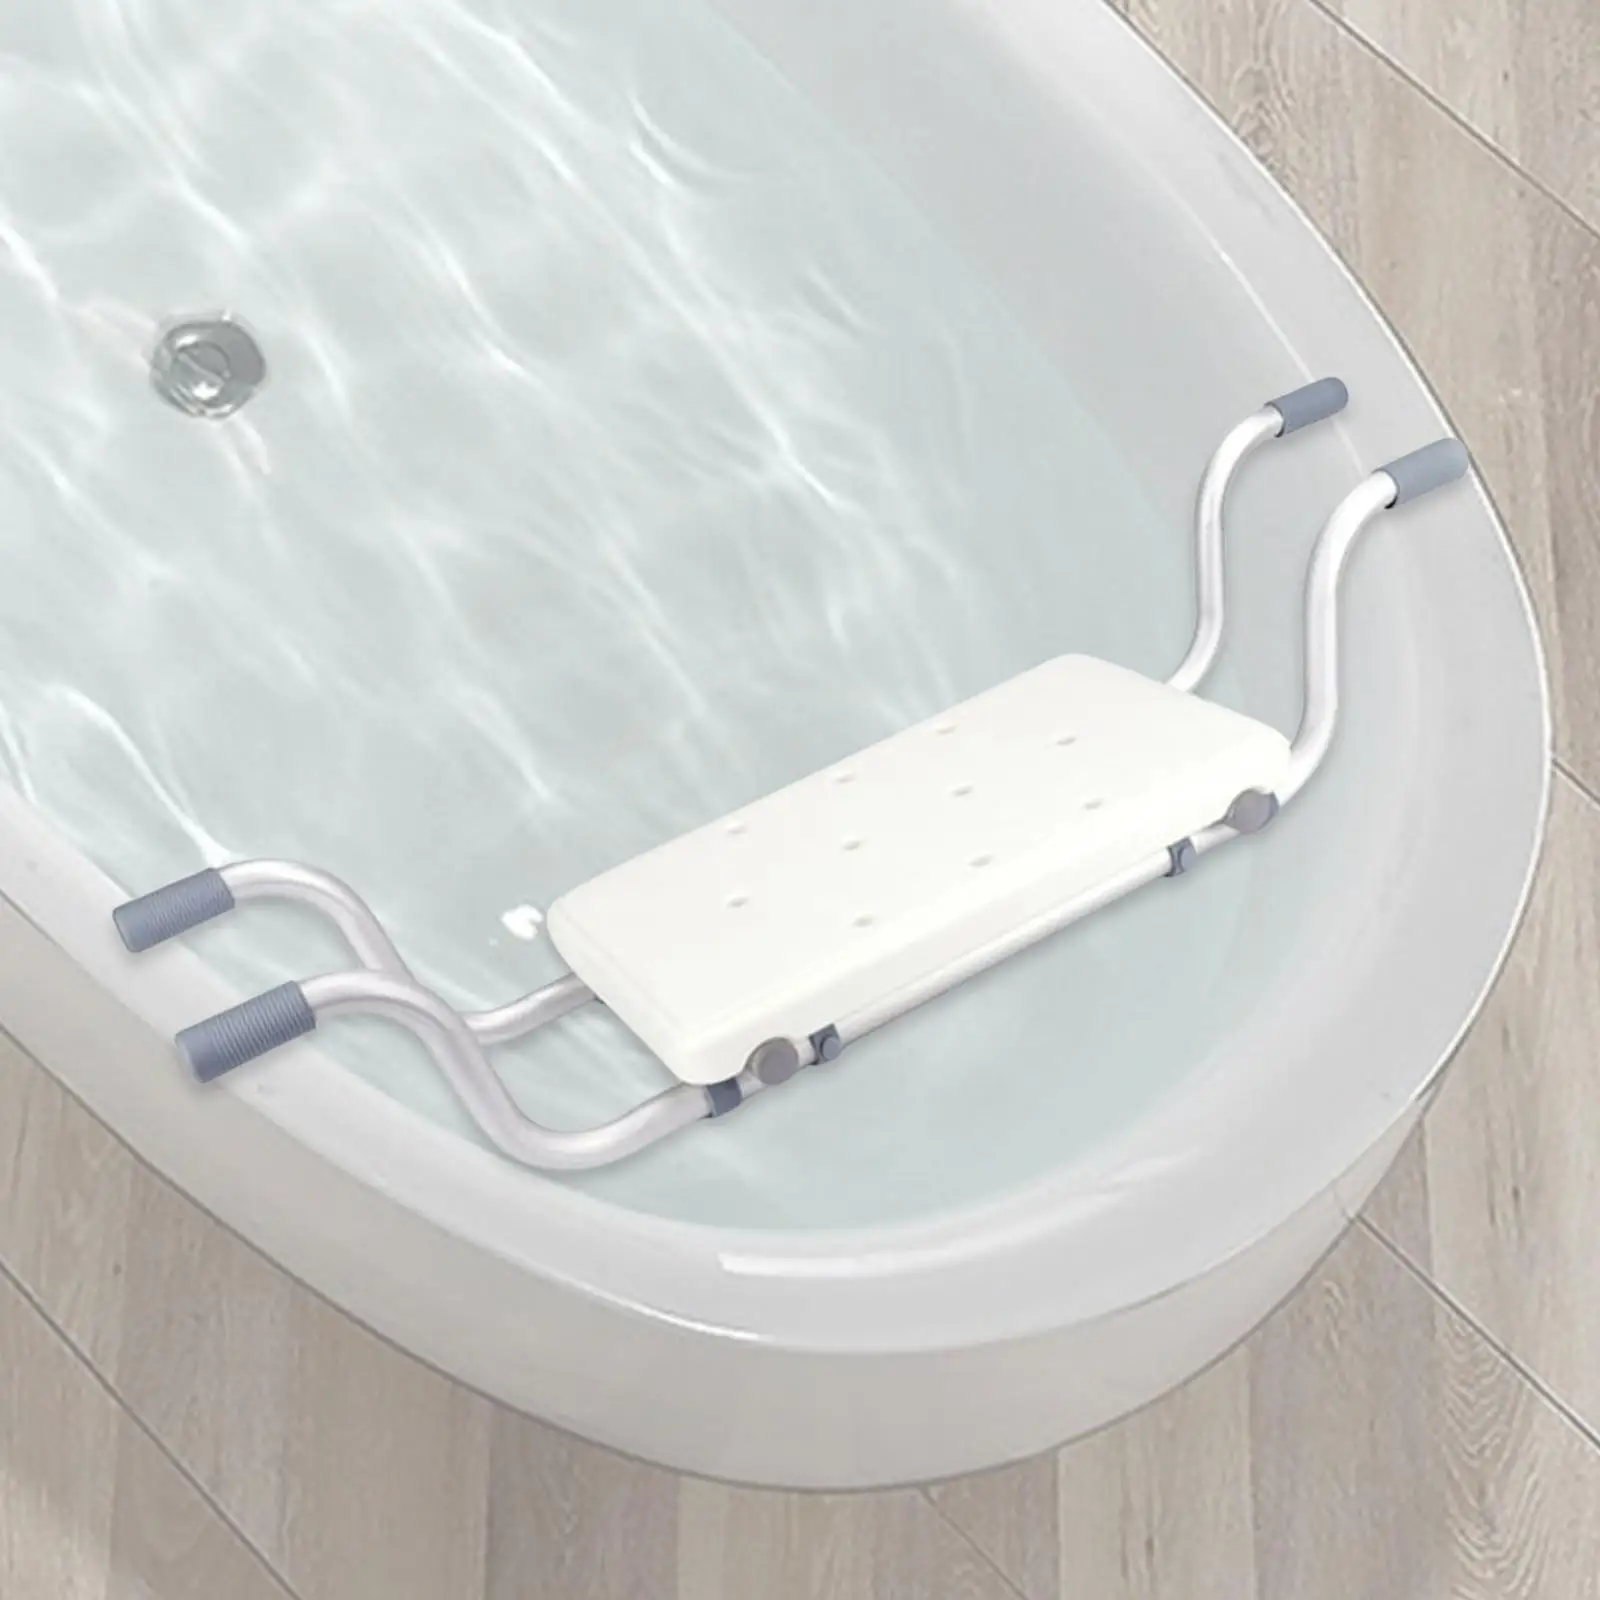 Bath, Lightweight up to 130kg Weight Shower  for Seniors Sturdy and Comfortable